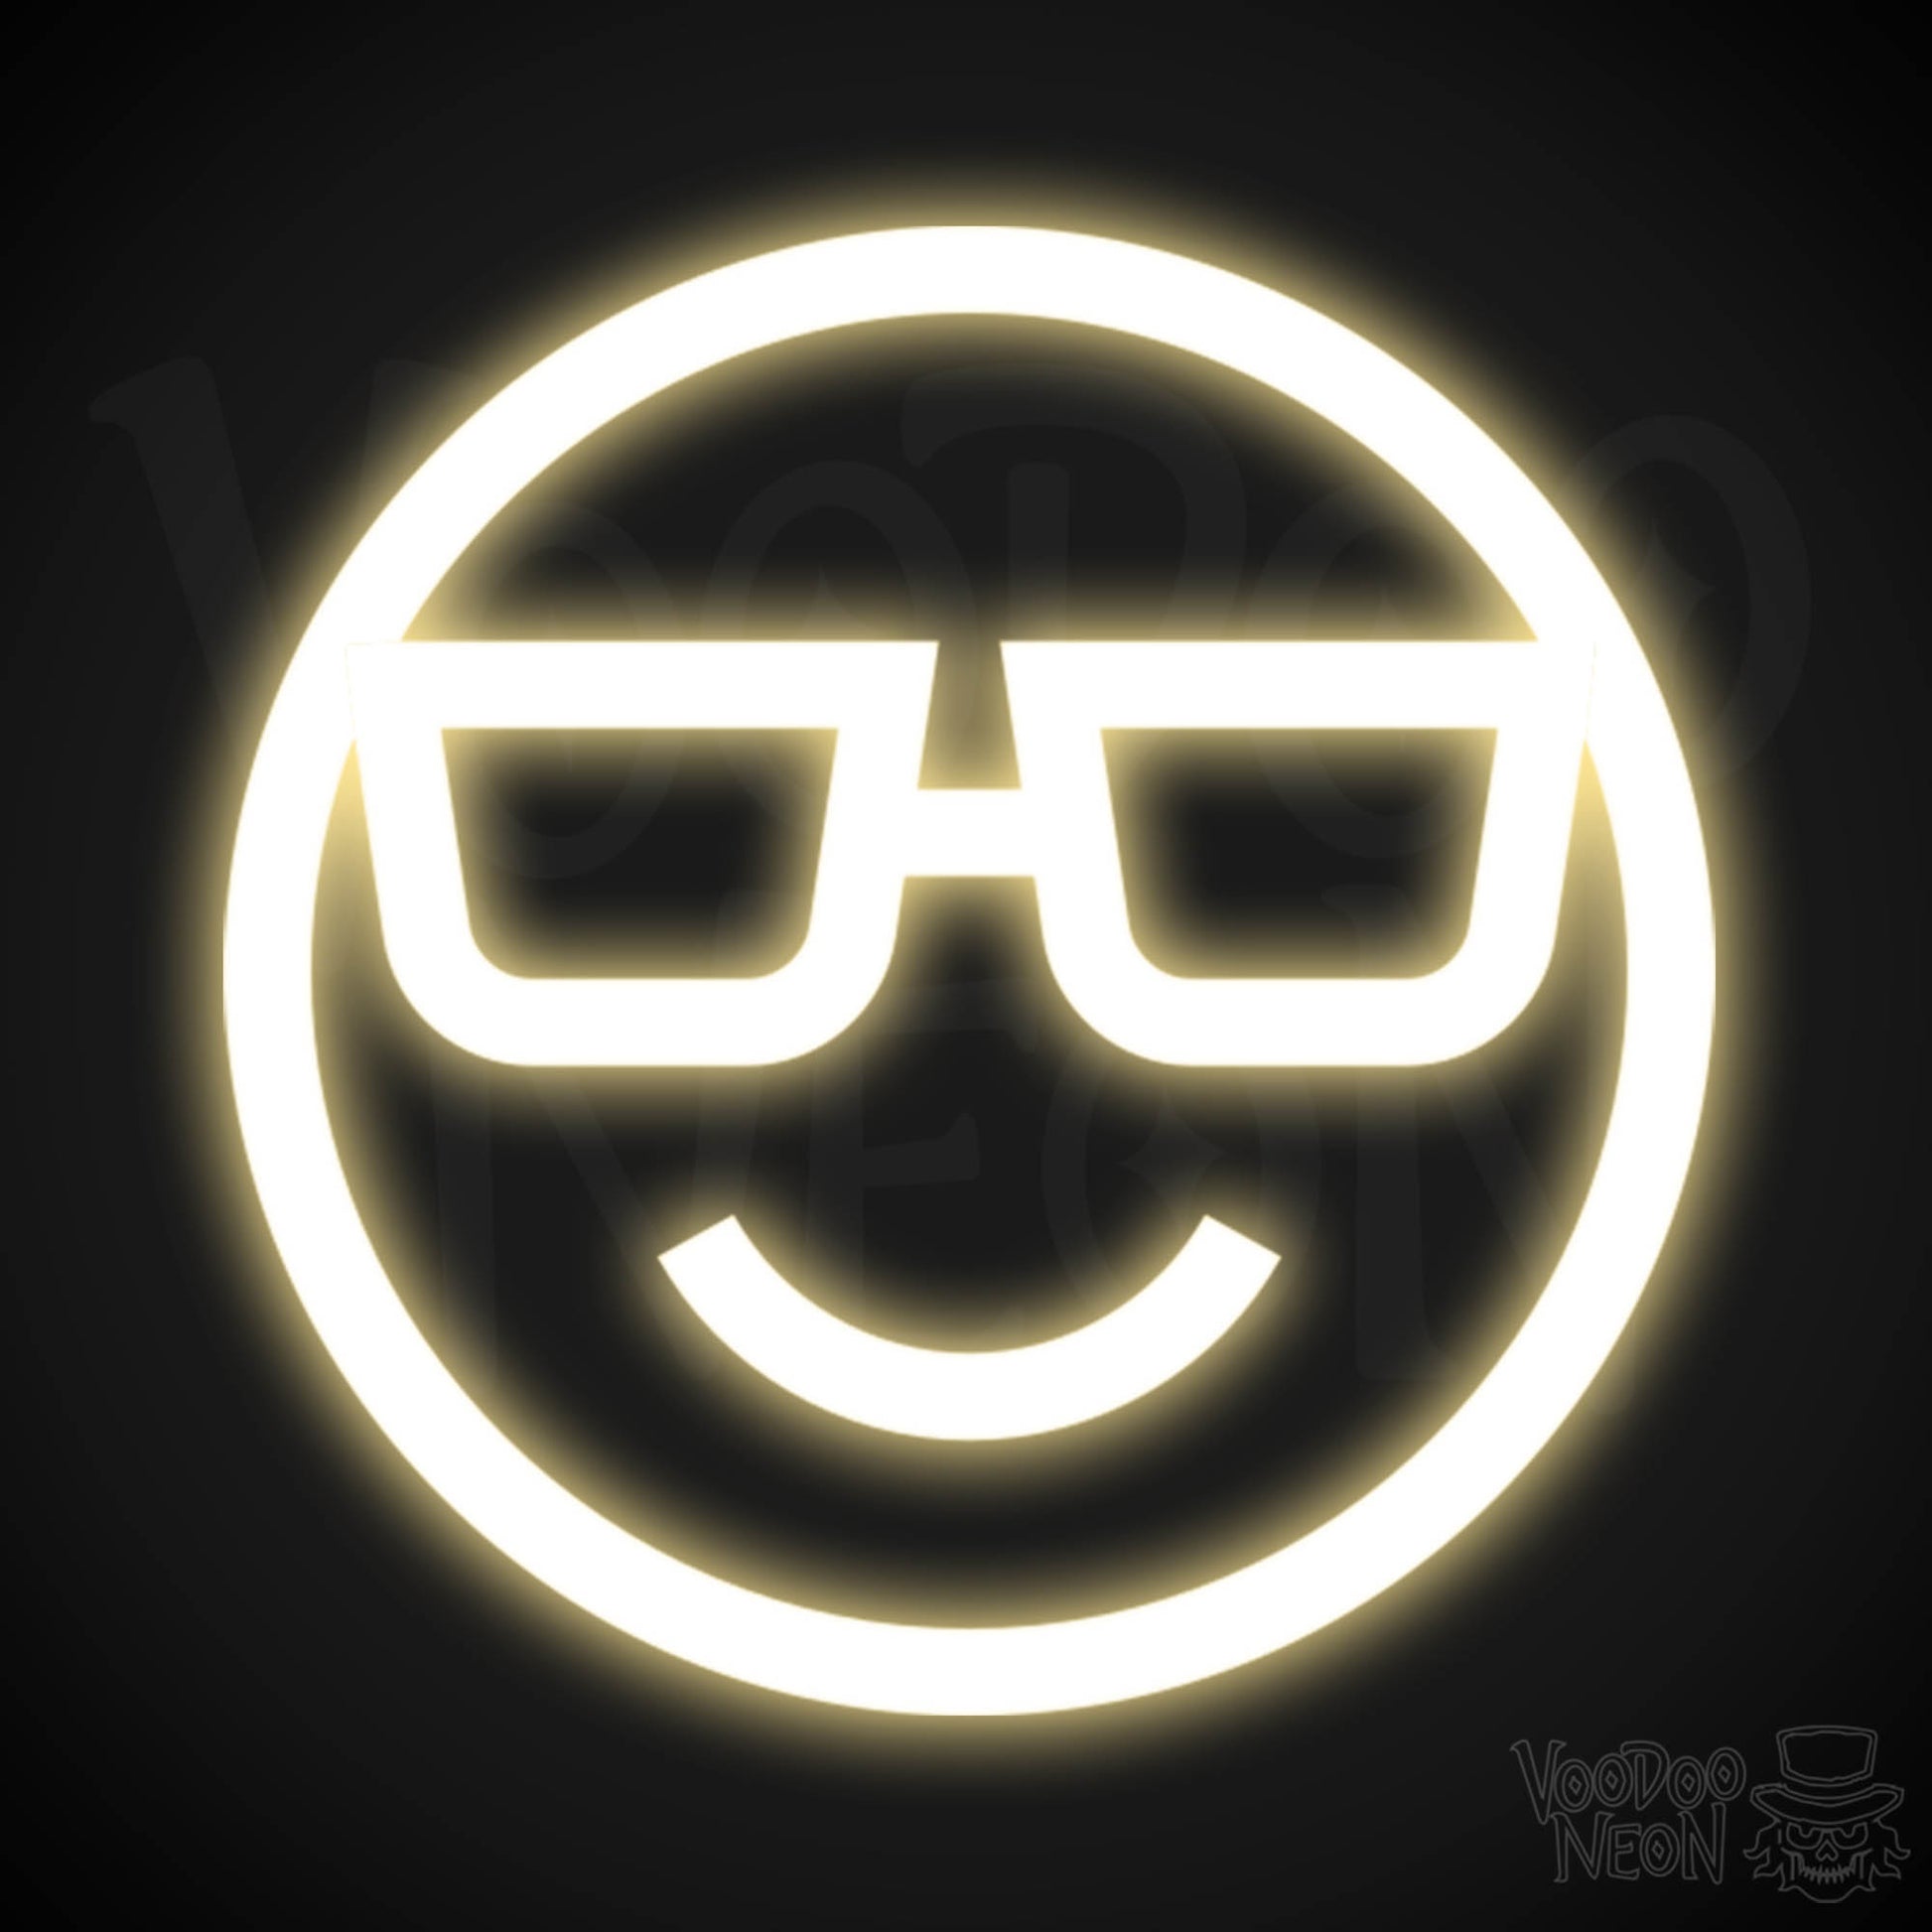 Neon Smiley Face - Smiley Face Neon Sign - LED Wall Art - Color Warm White